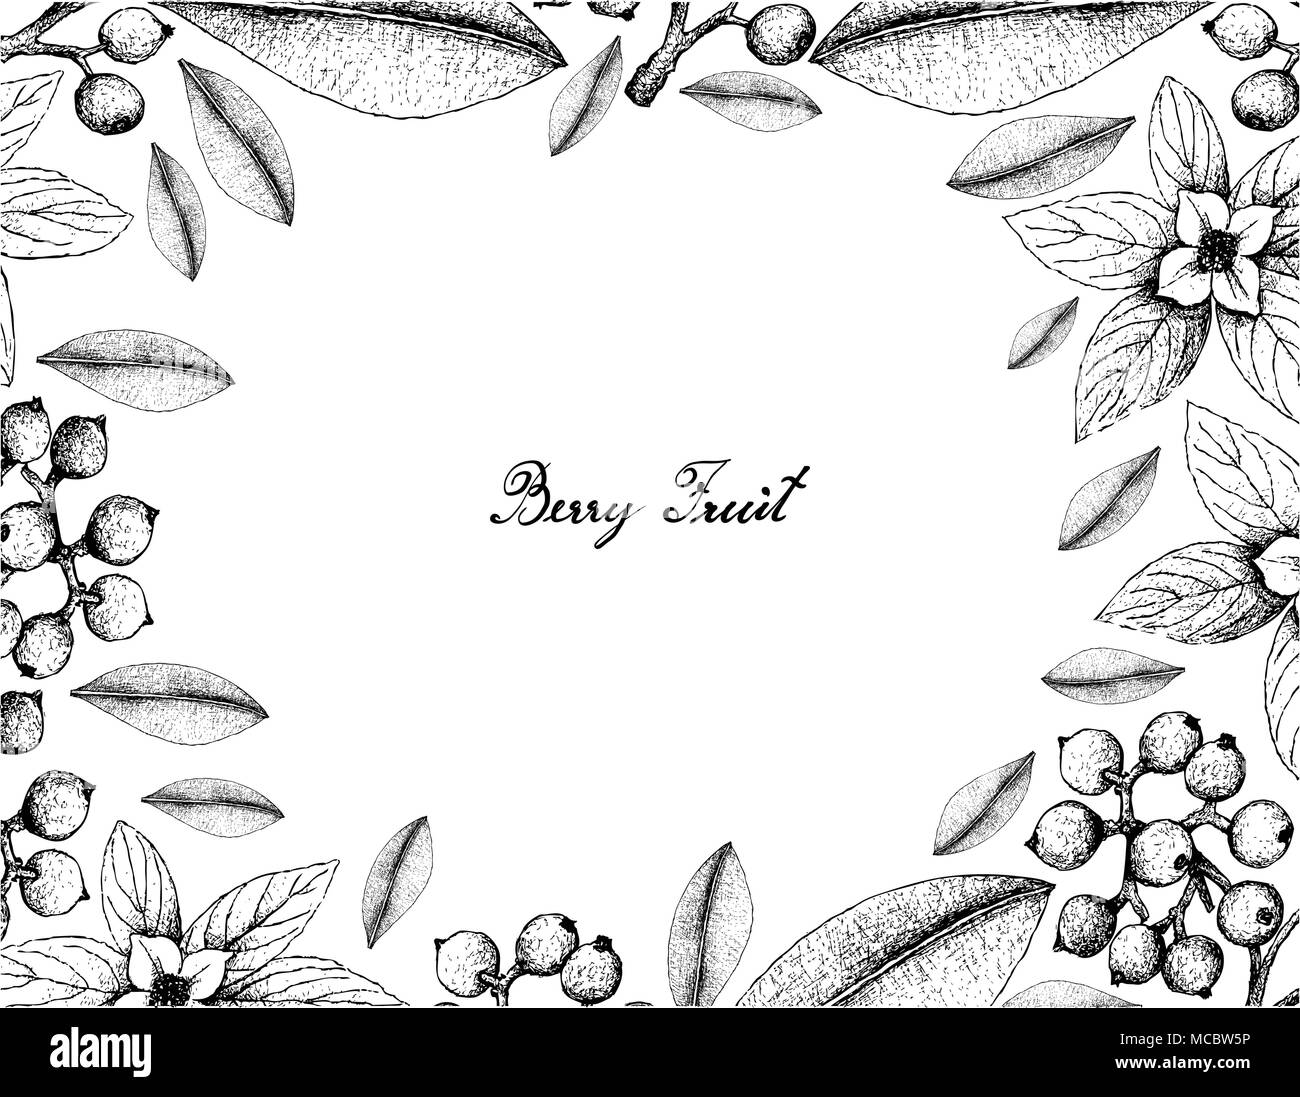 Berry Fruit, Illustration Frame of Hand Drawn Sketch of Carallia Brachiata and Bunchberry, Dwarf Cornel or Cornus Suecica Fruits Isolated on White Bac Stock Vector